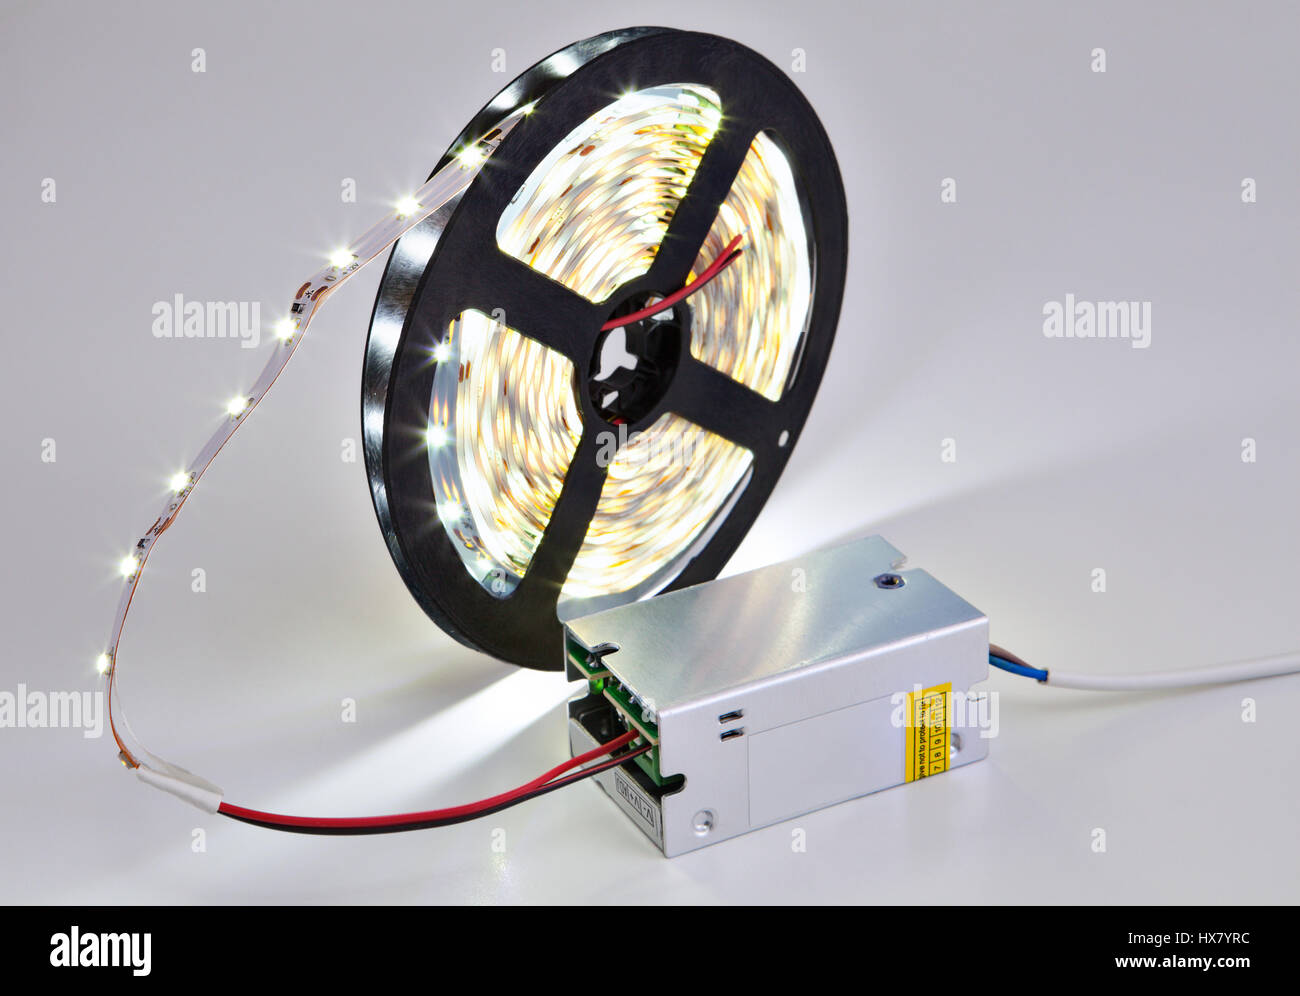 Spool of luminous LED strip light connected to Power Supply Adapter Driver. Stock Photo